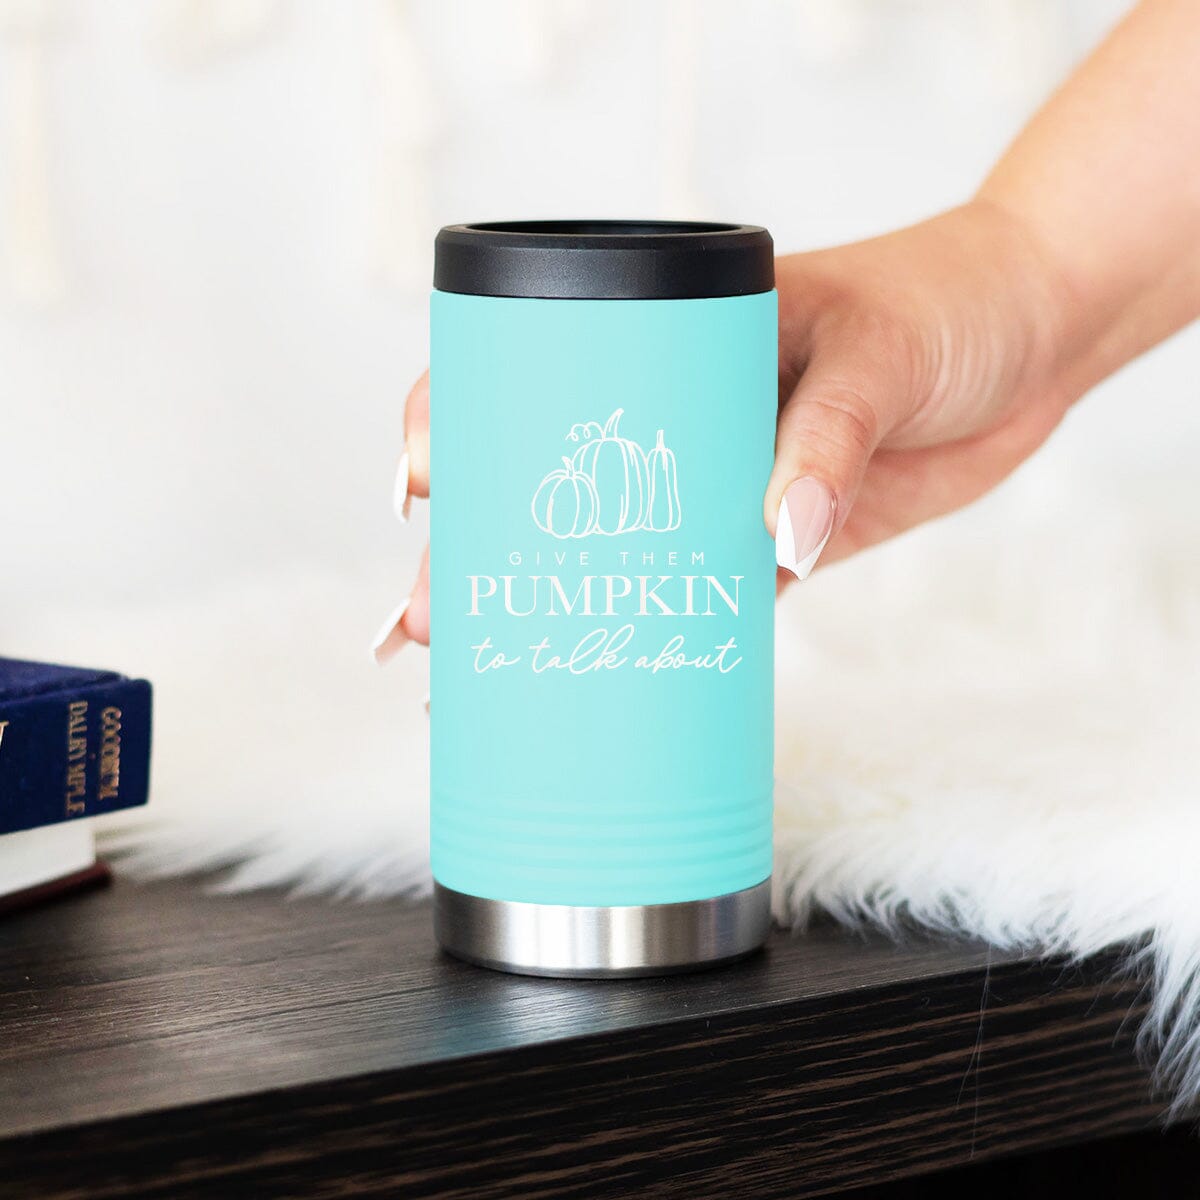 Give Them Pumpkin To Talk About Teal Slim Can Beverage Holder